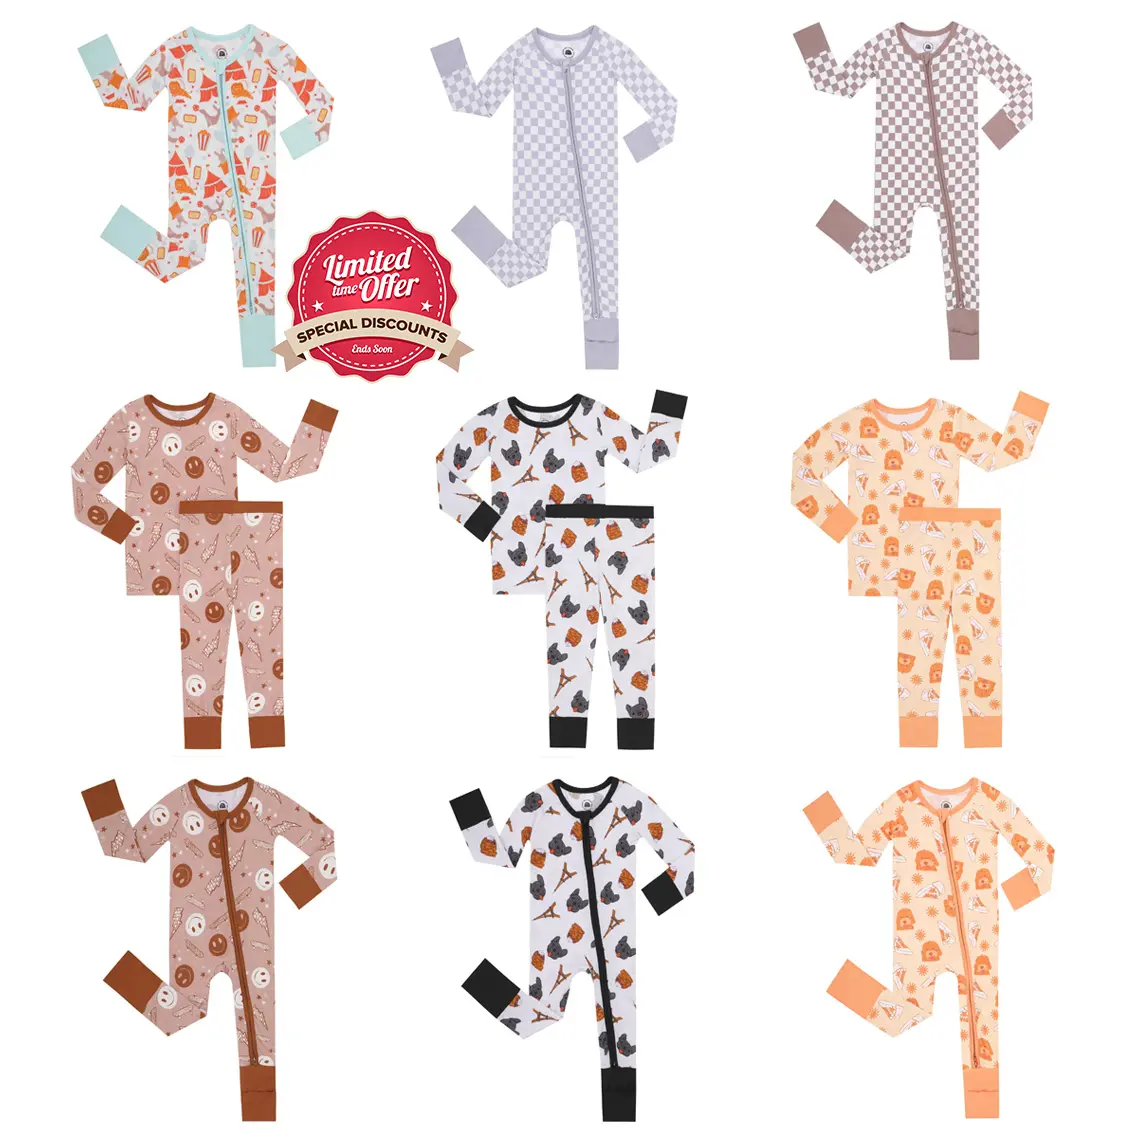 Make Products with Heart Custom Baby Long Sleeves Children's Jumpsuit Bamboo Baby Romper with Zipper Pajamas